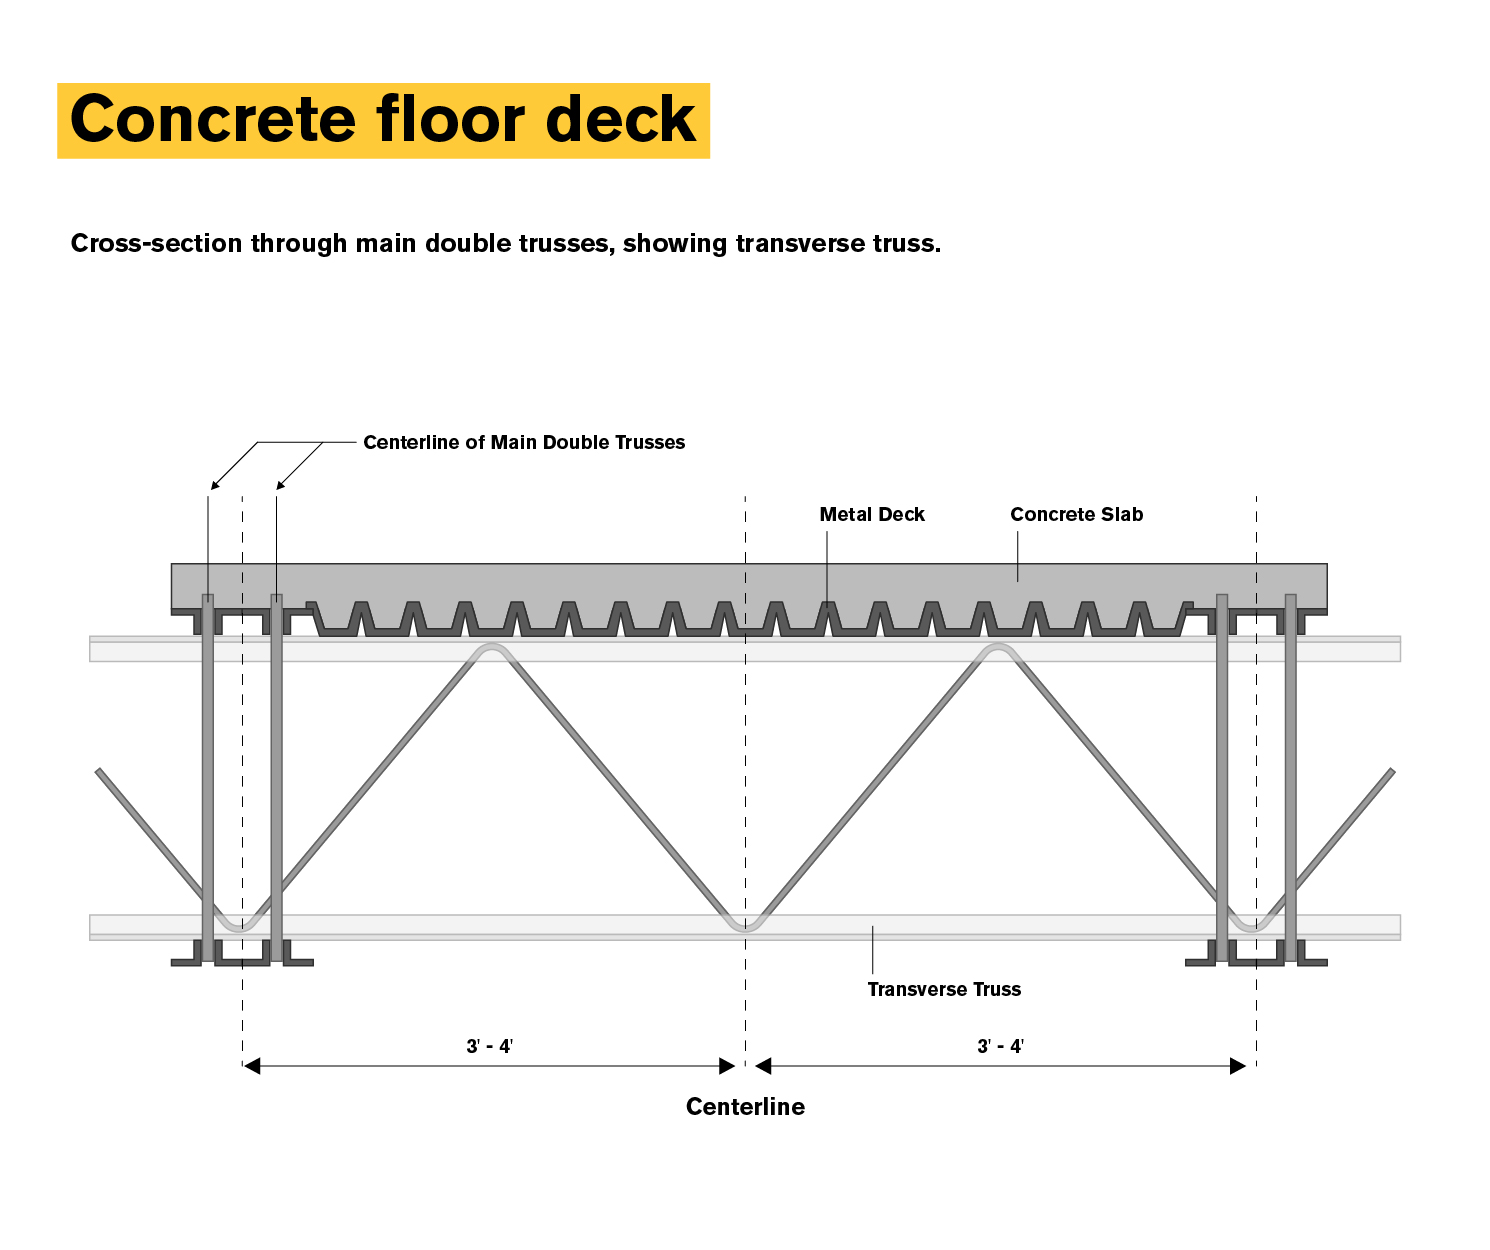 An illustration of a cross-section of the concrete floor deck of the World Trade Center